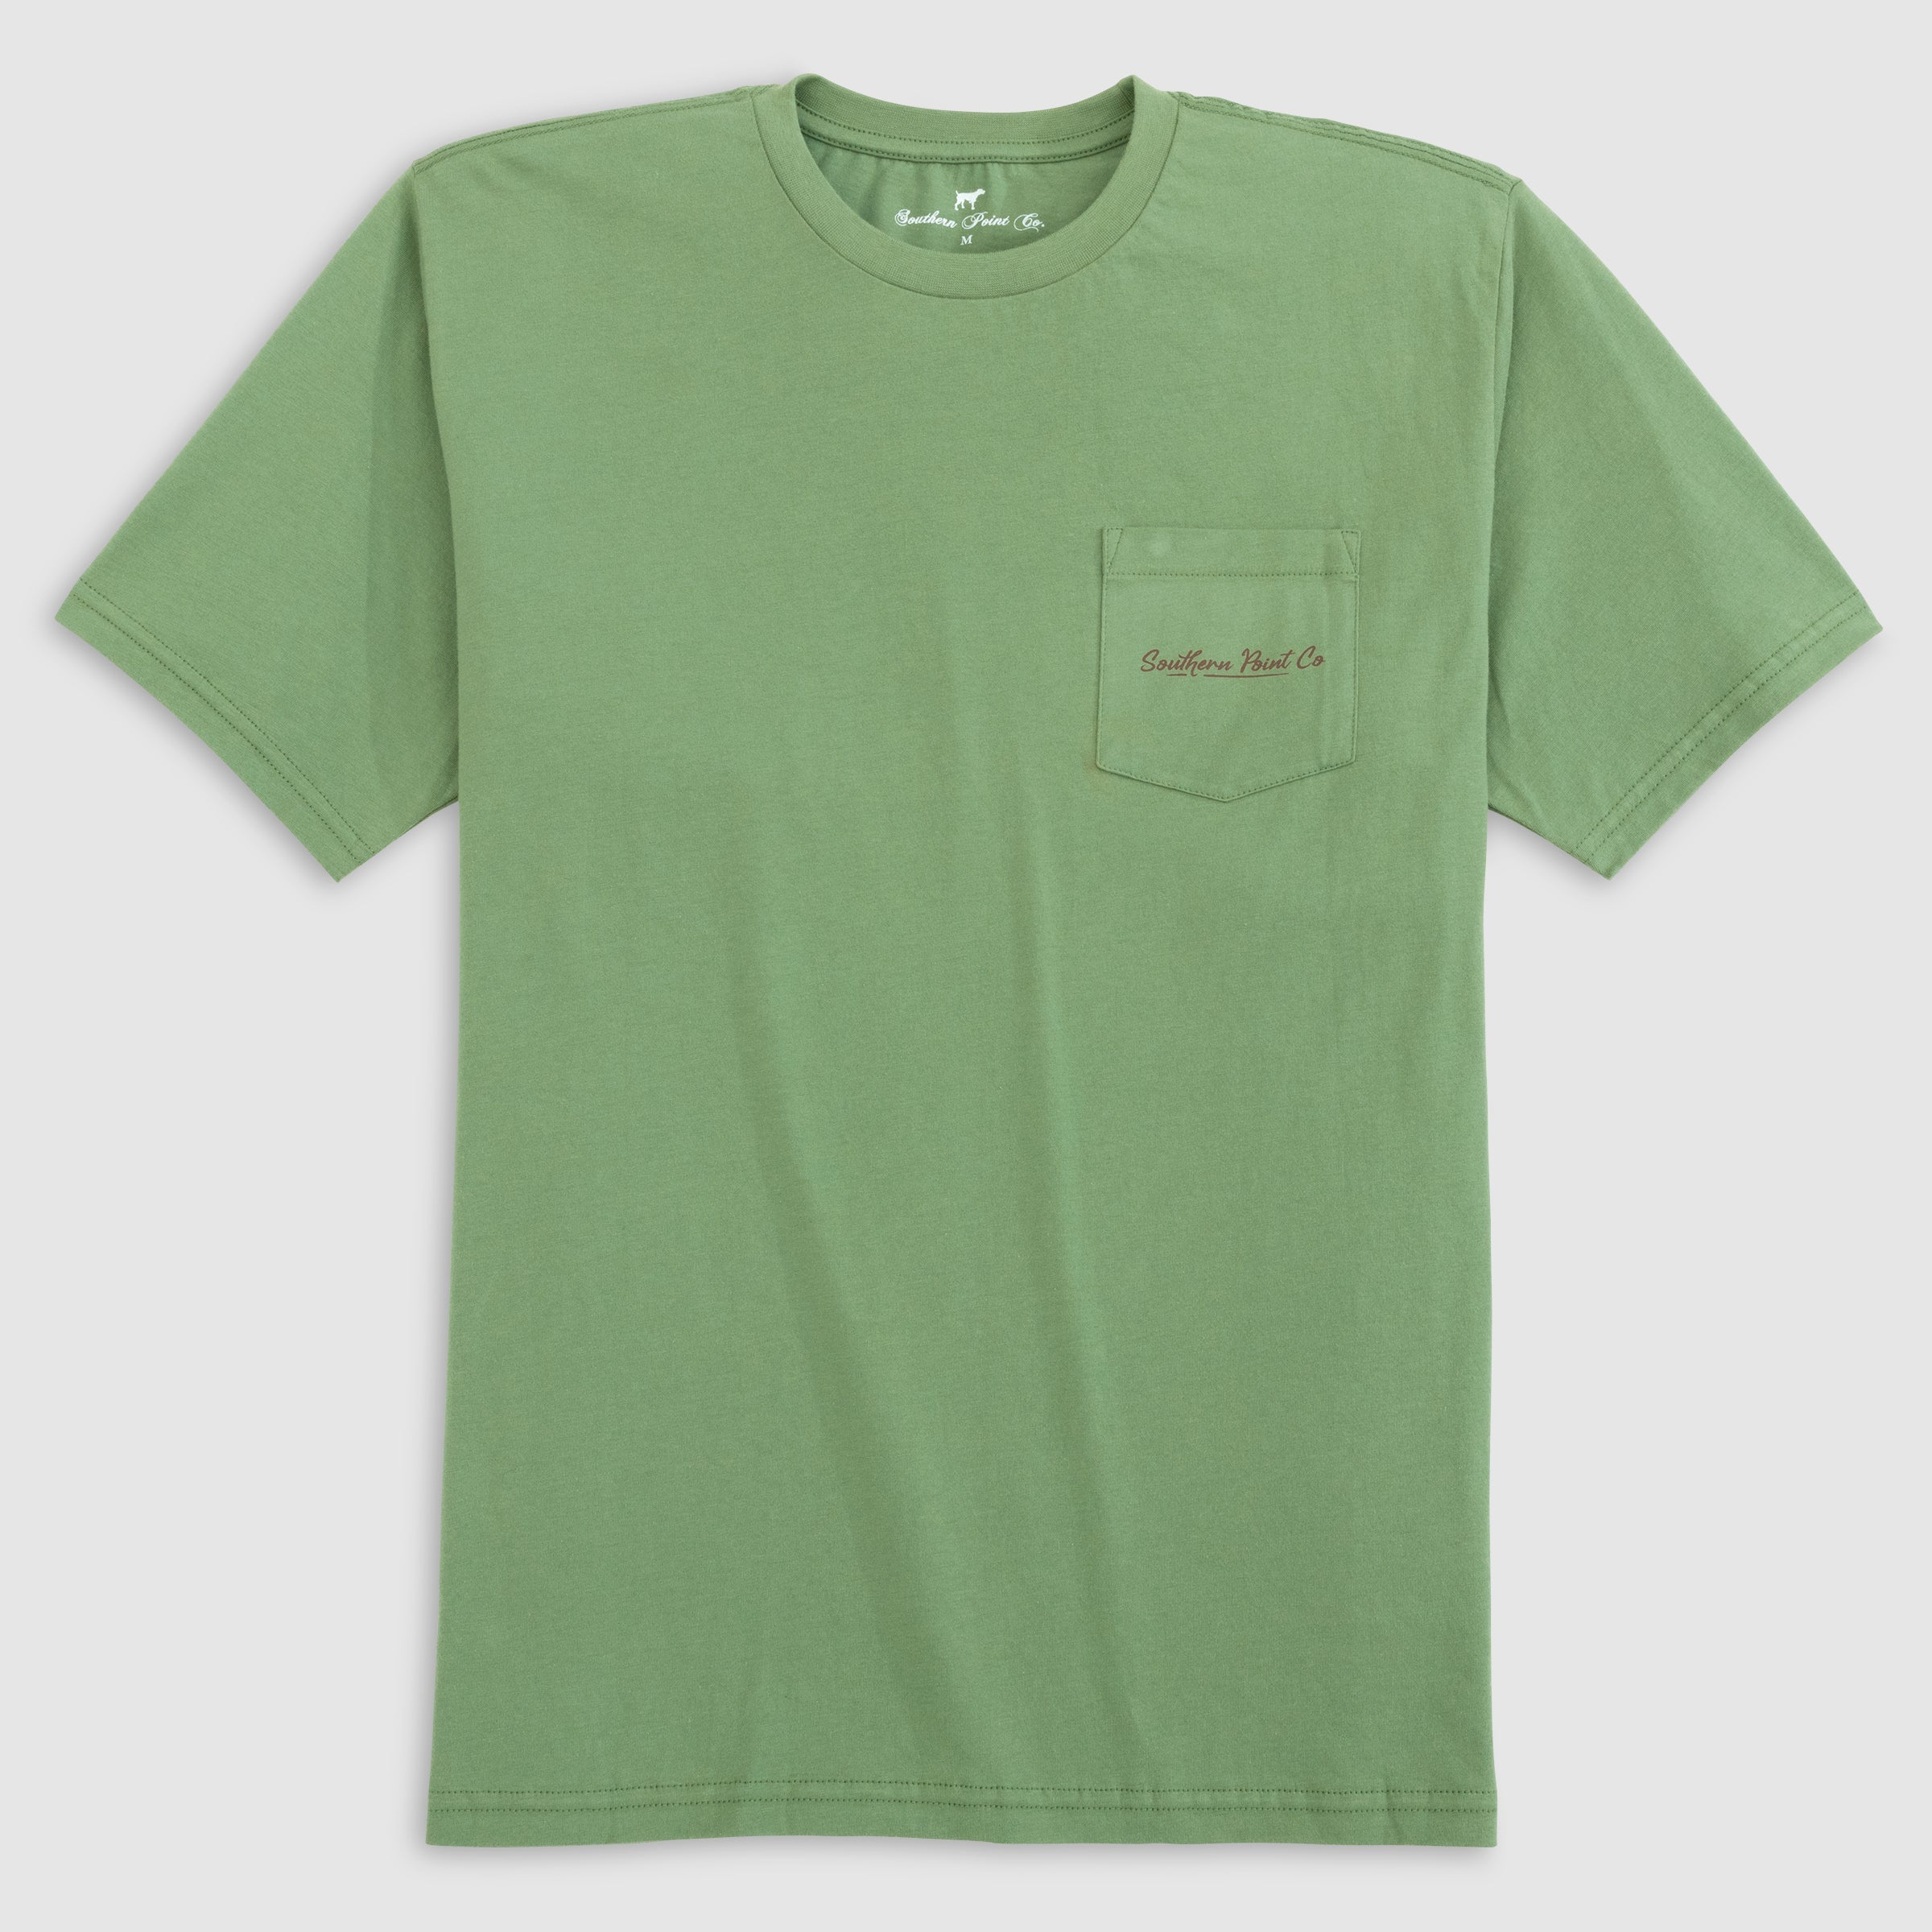 The Greyton Tee by Southern Point Co.